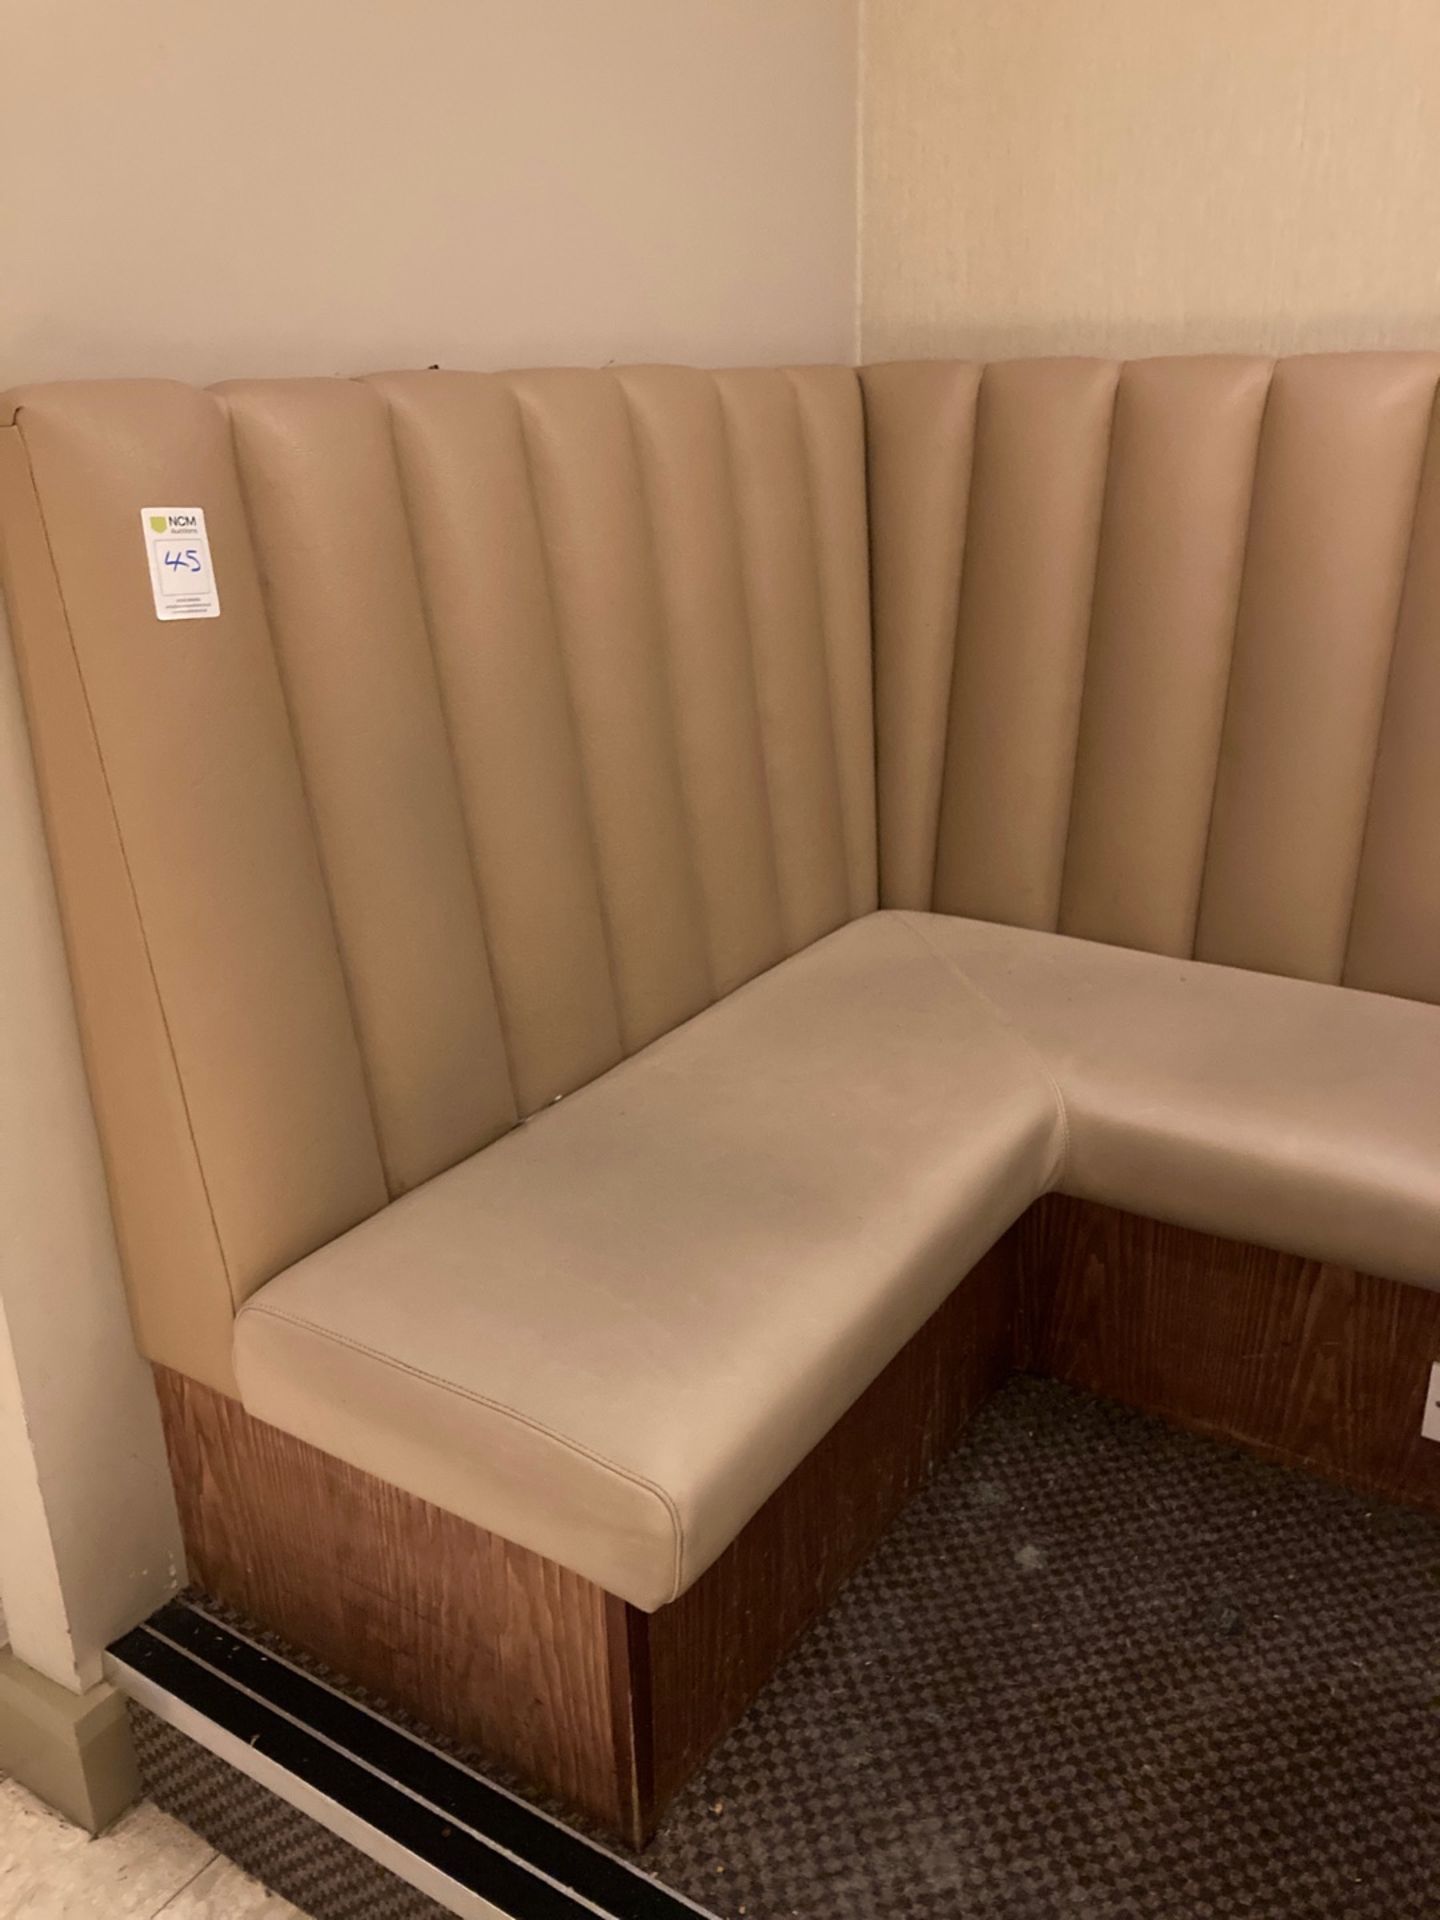 Banquette Seating - Image 2 of 5